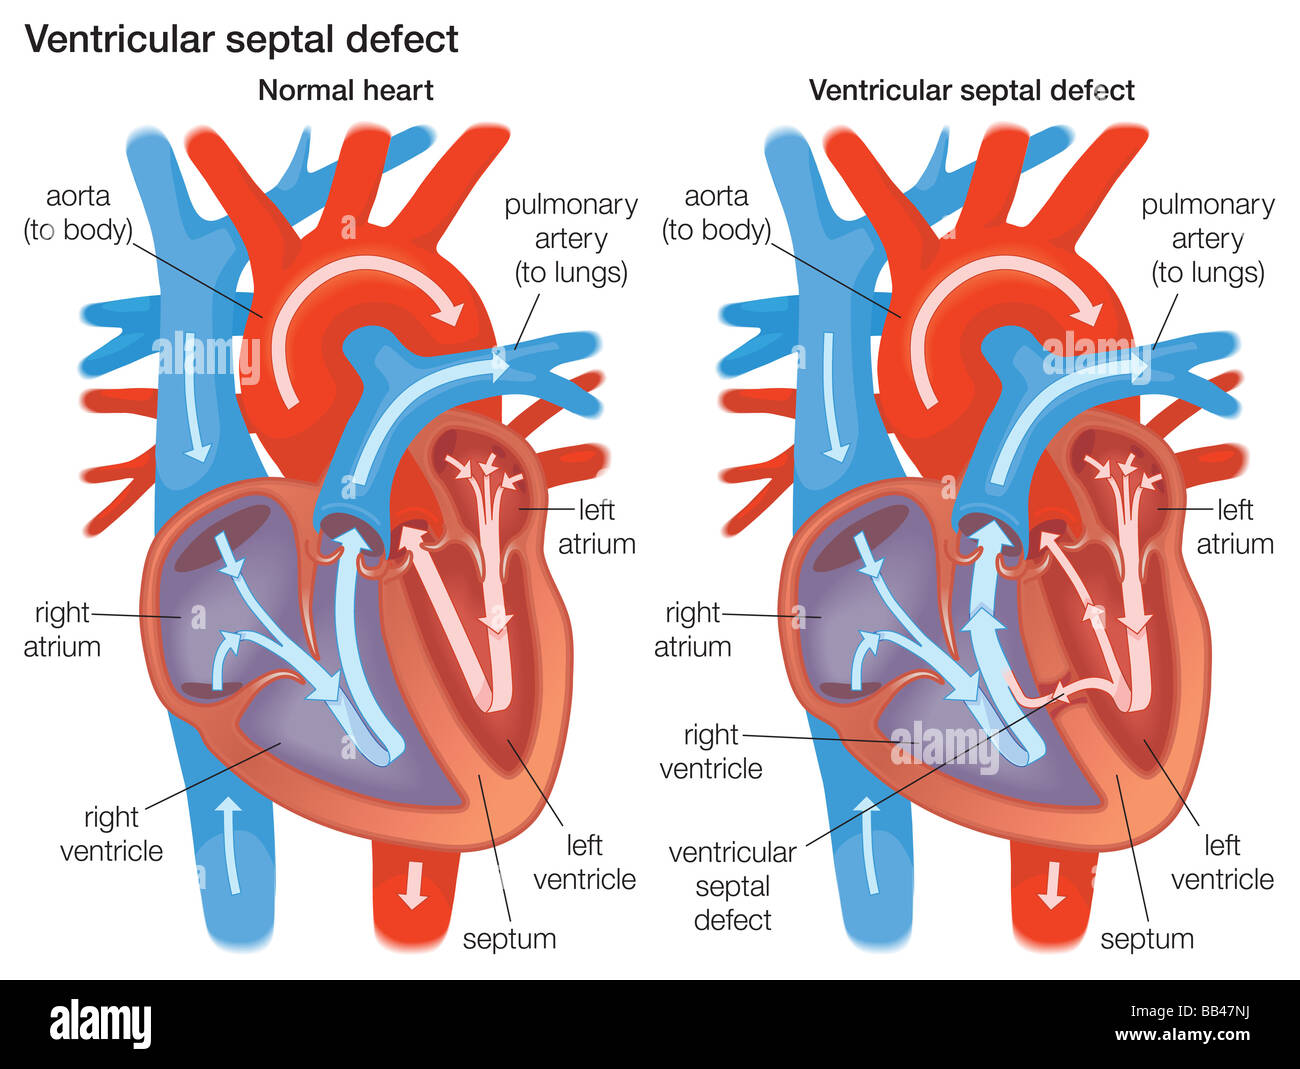 Comparison of a normal heart to one with a ventricular septal defect Stock Photo